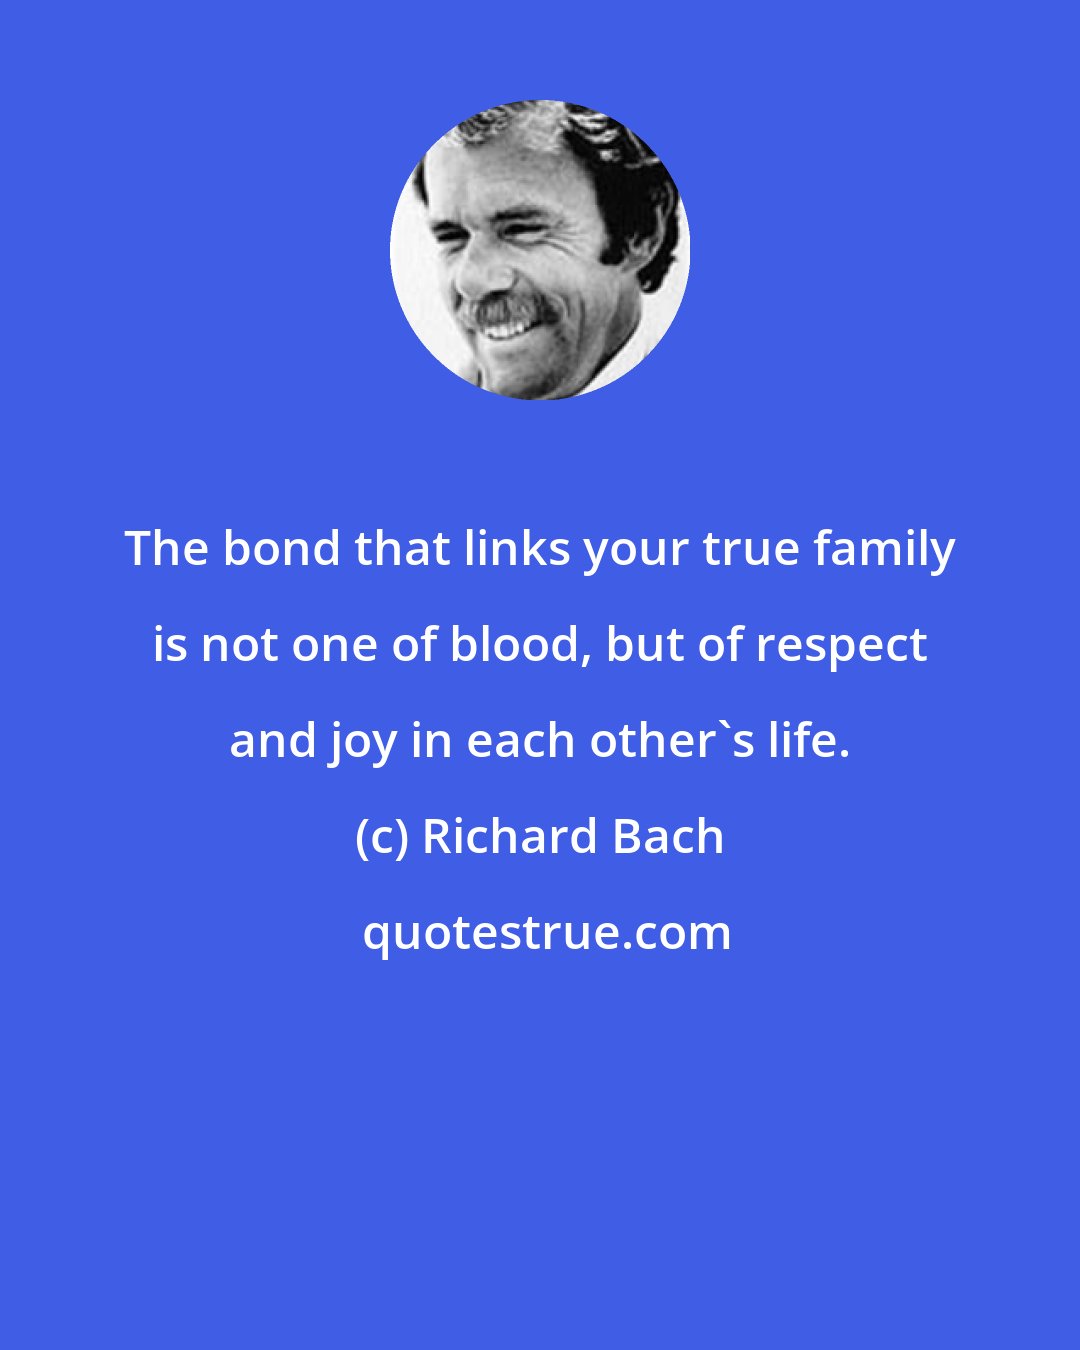 Richard Bach: The bond that links your true family is not one of blood, but of respect and joy in each other's life.